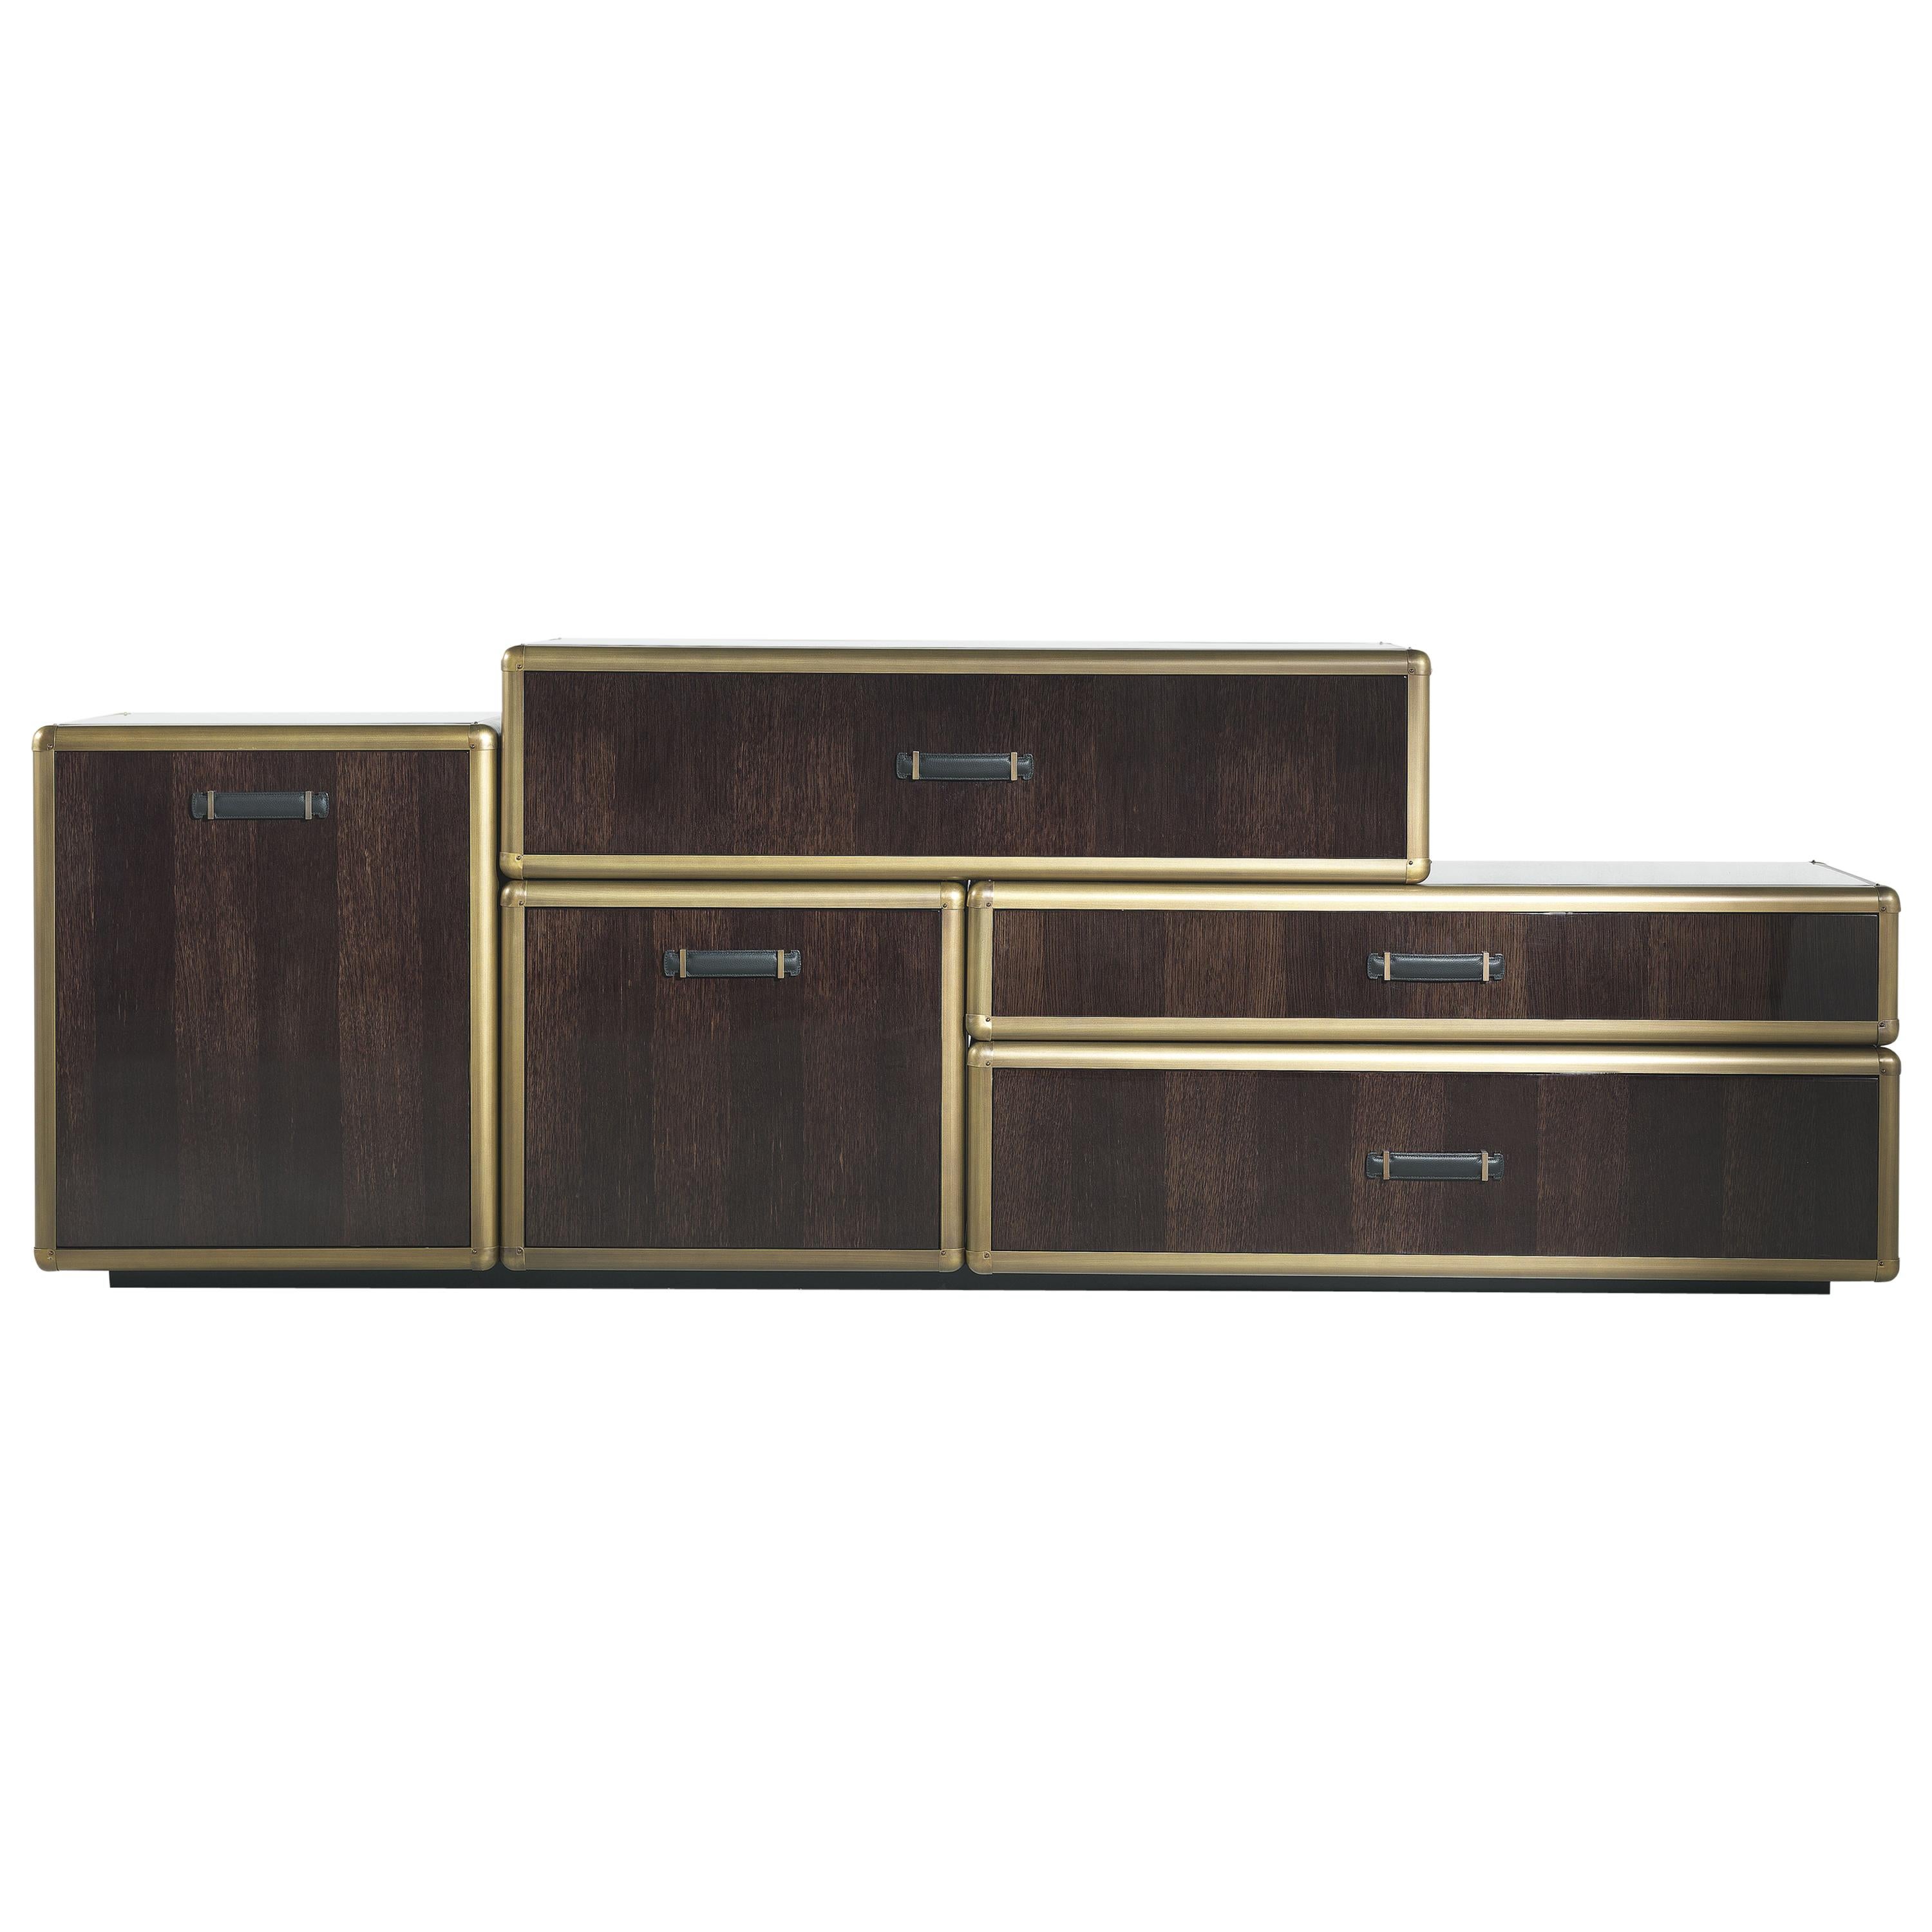 21st Century Fly Case Sideboard in Wood by Roberto Cavalli Home Interiors